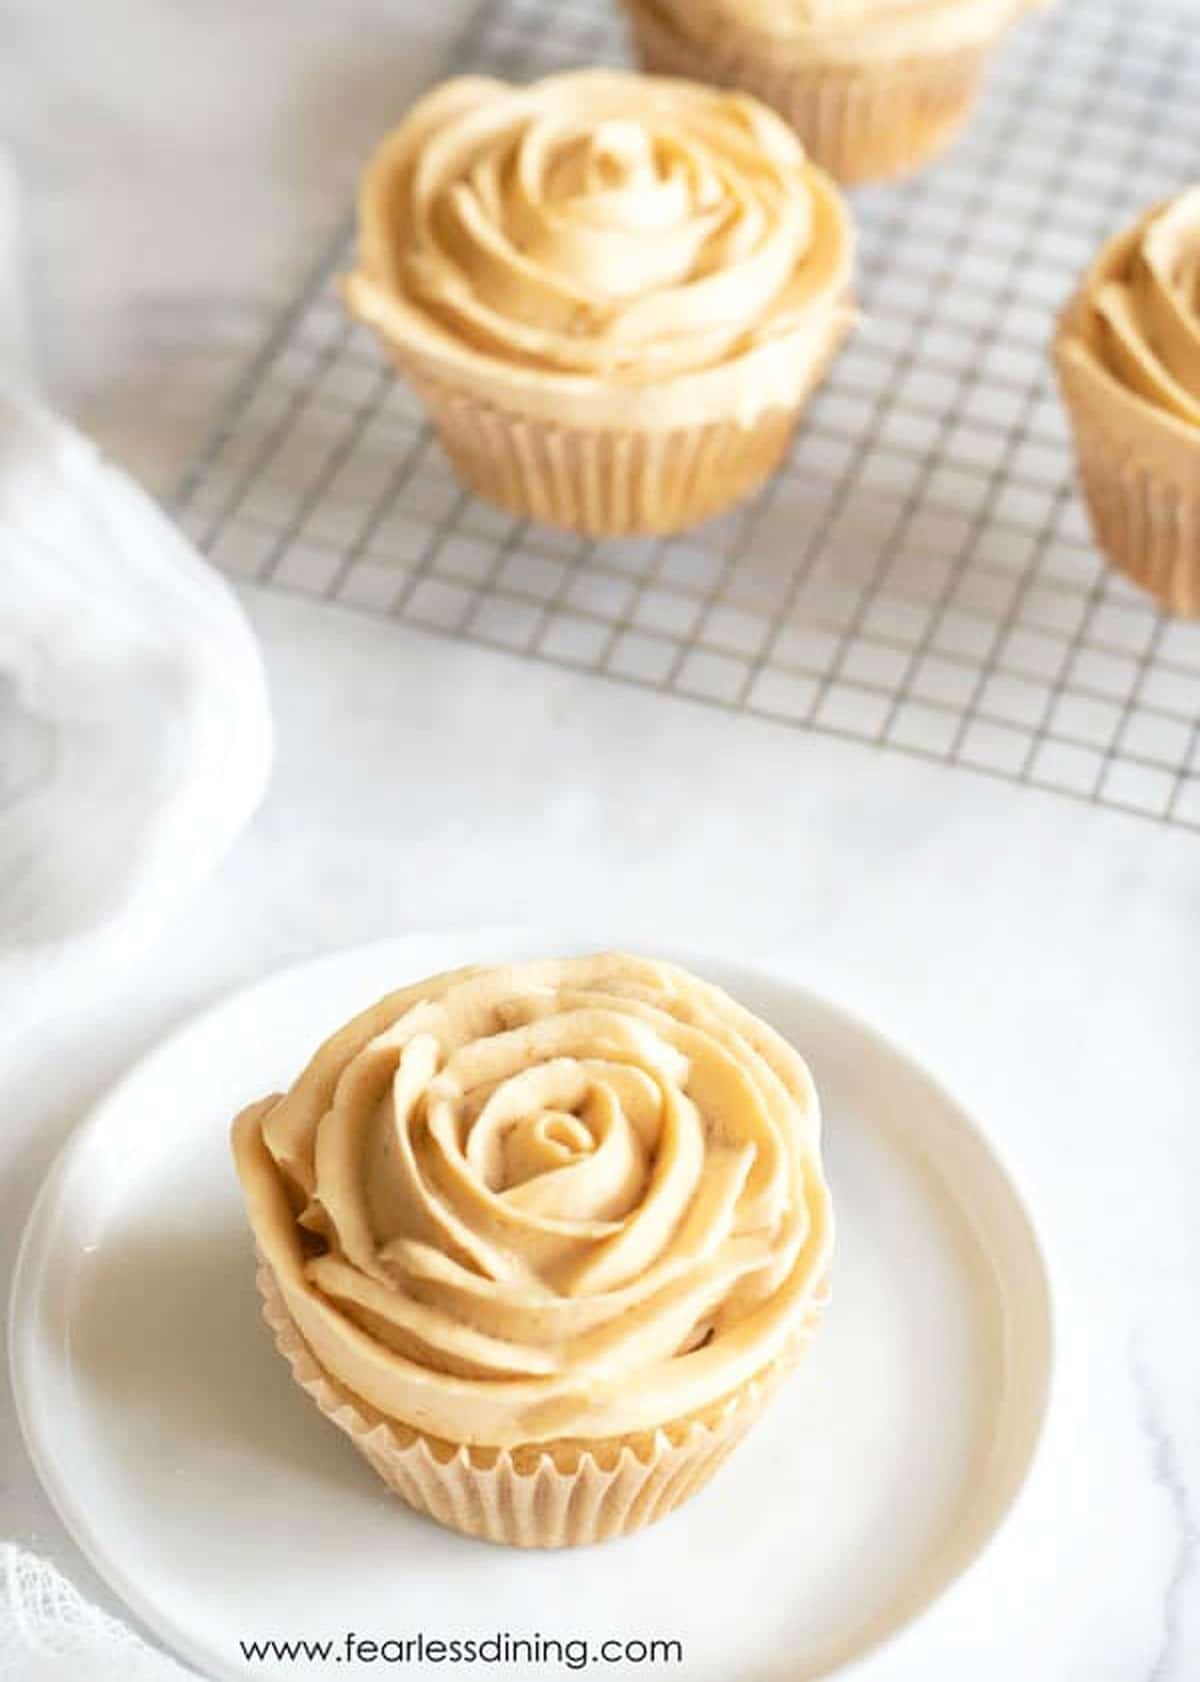 a caramel cupcake with frosting piped like flower petals on a plate